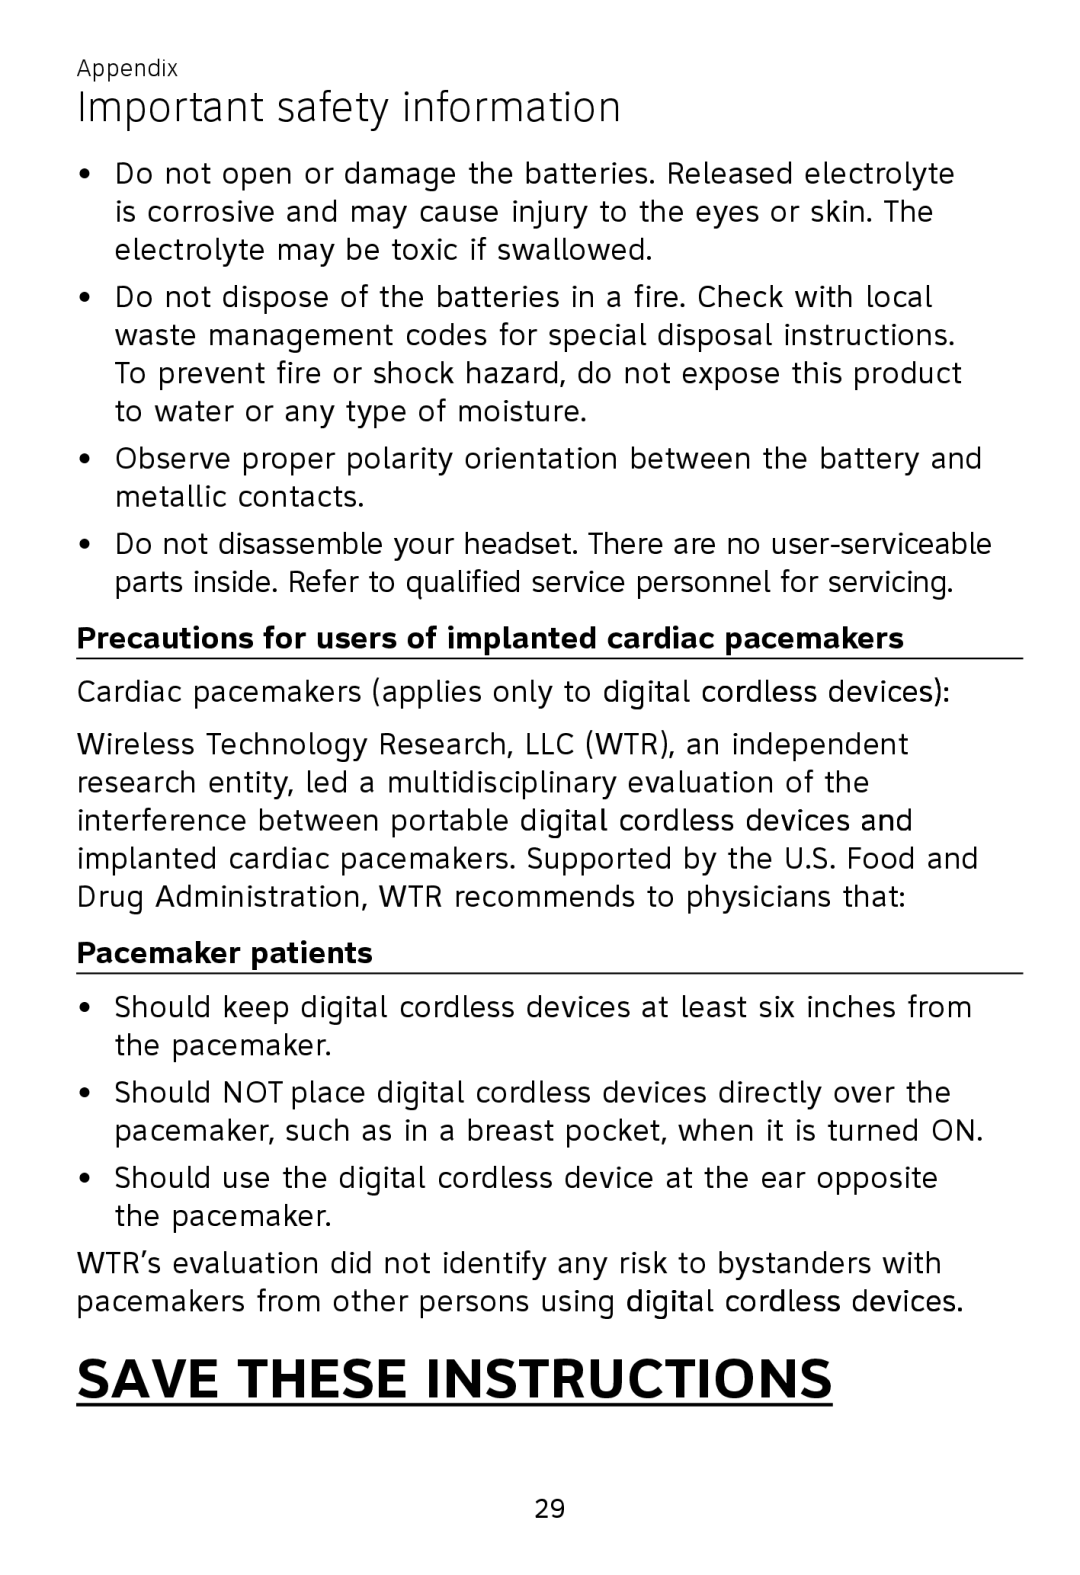 AT&T TL7700 user manual Pacemaker patients, Save These Instructions, Important safety information 